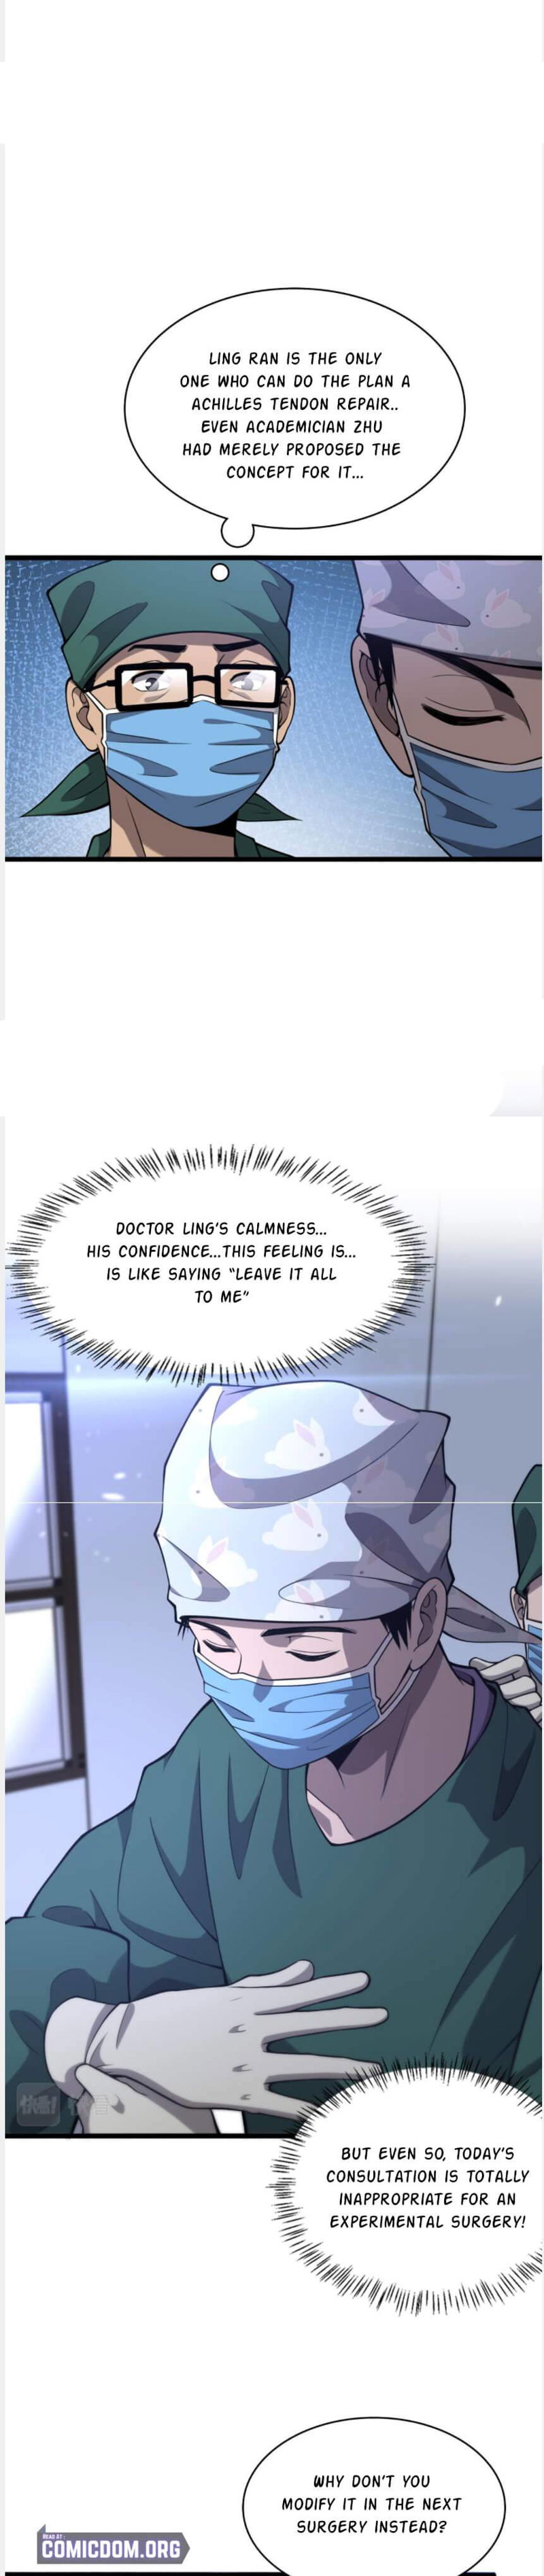 Great Doctor Ling Ran Chapter 113 page 5